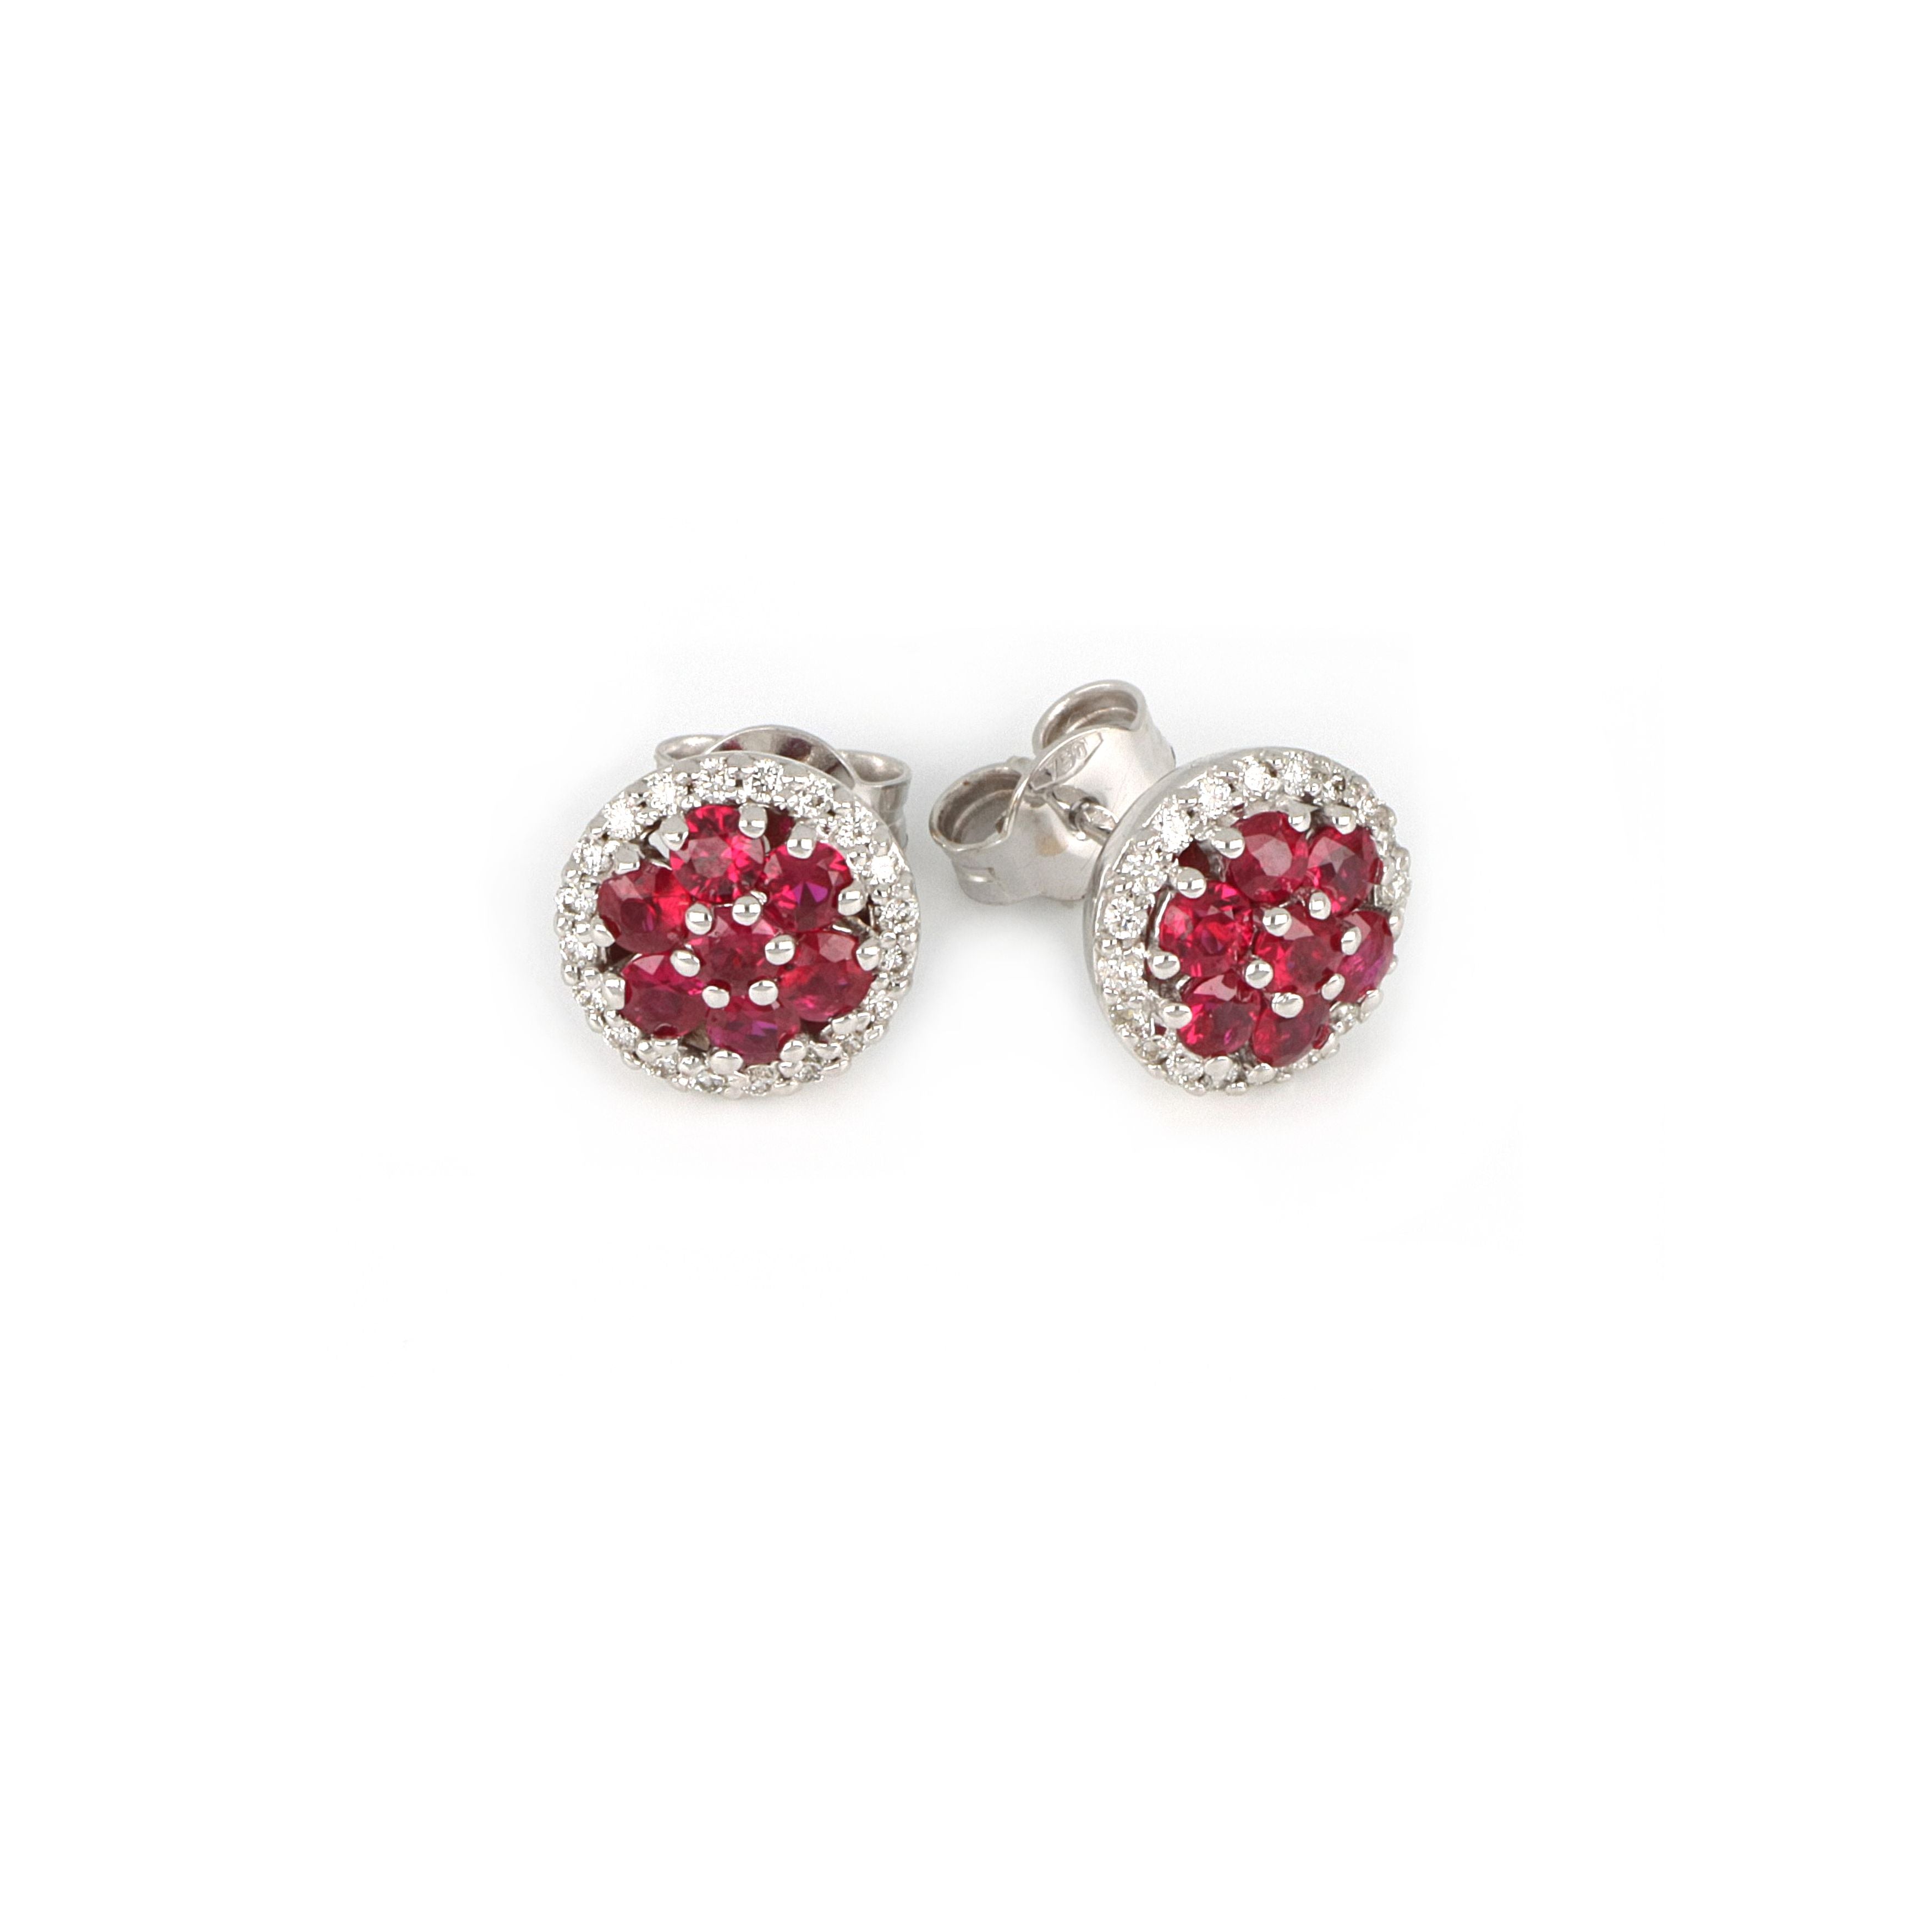 Video White Gold Earrings With Rubies And Diamonds